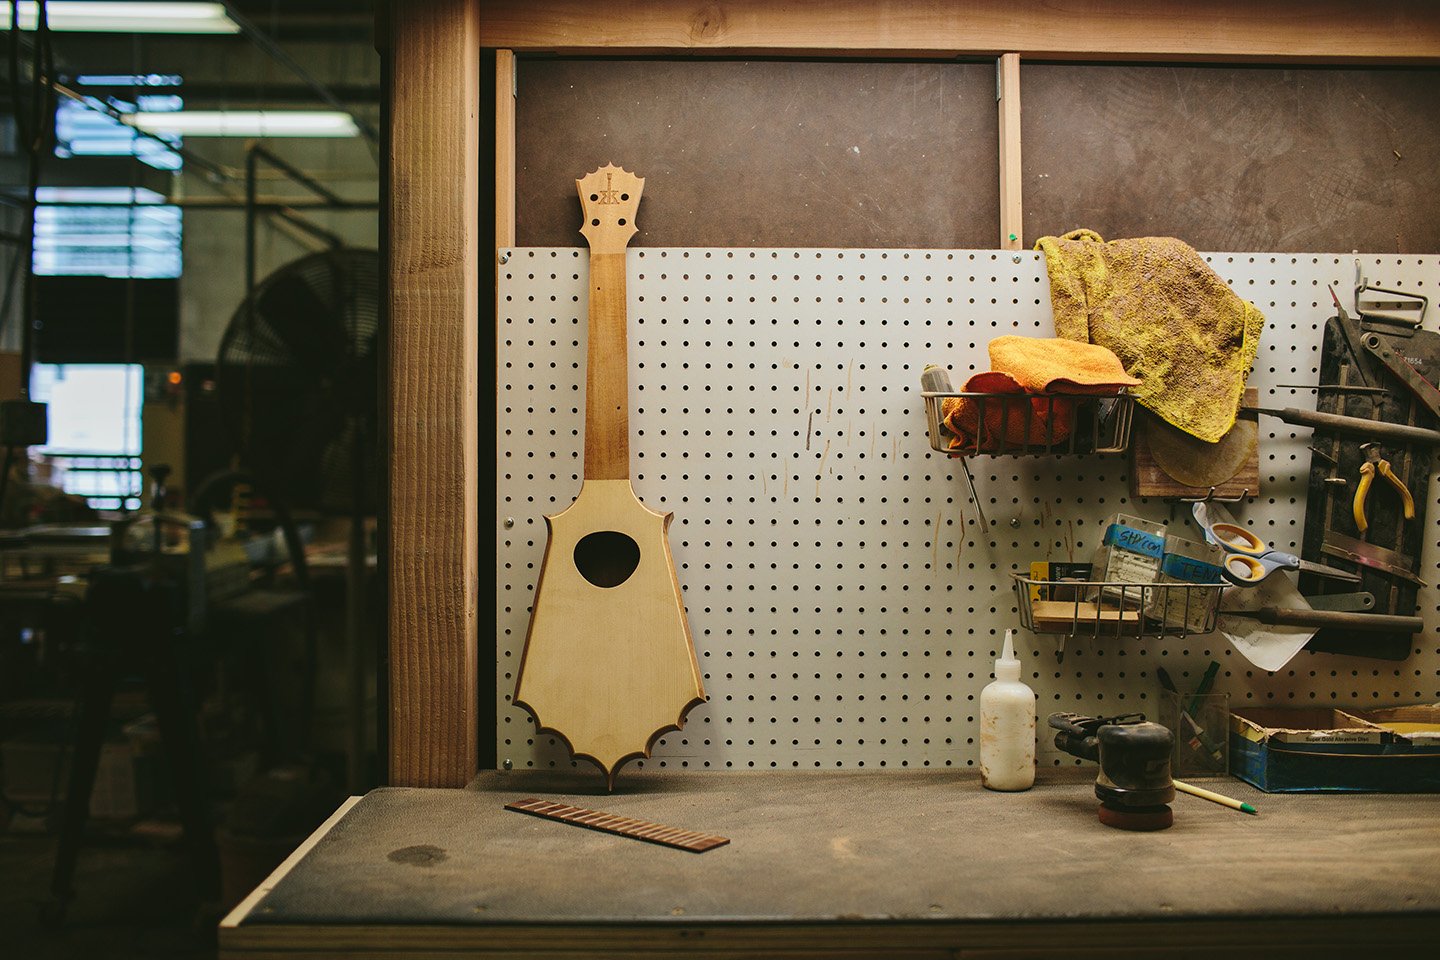 A Family’s Surprise Journey in ‘Ukulele Crafting